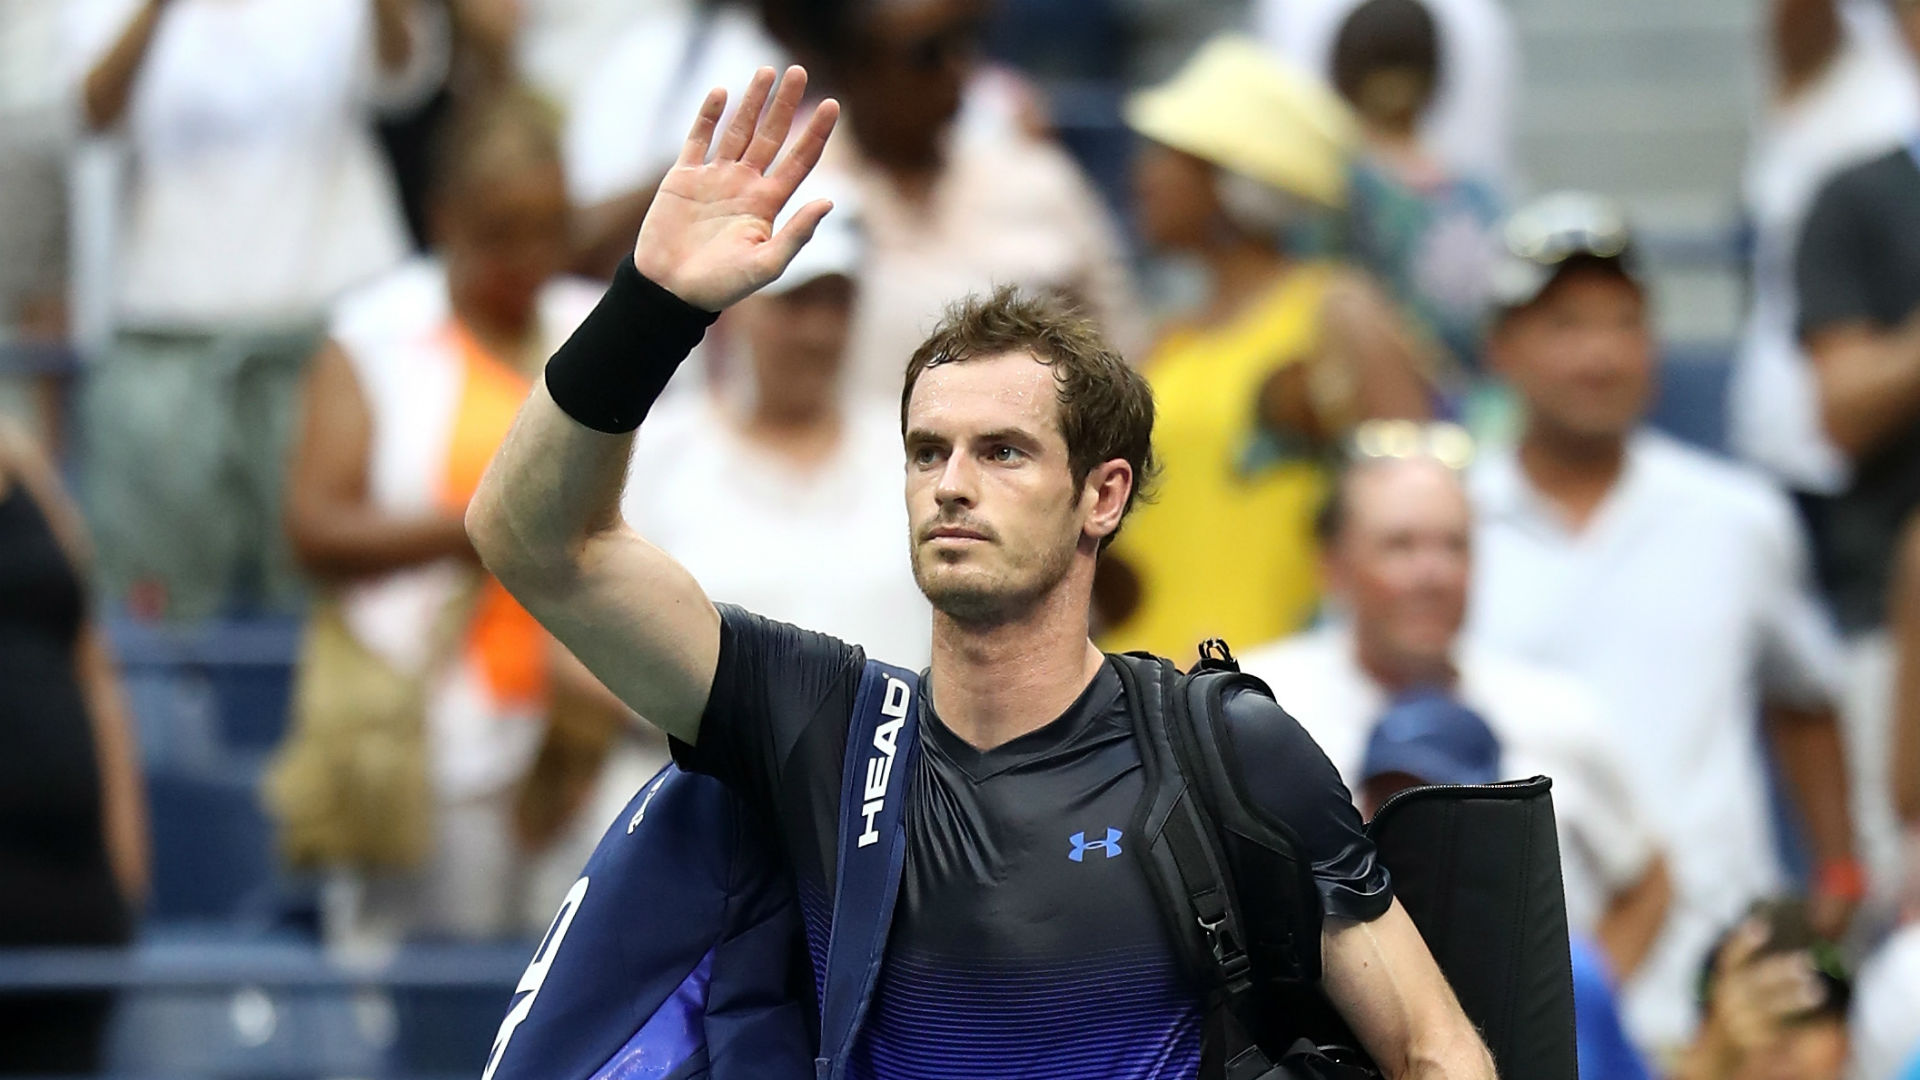 Andy Murray's penultimate tournament of 2018 ended at the quarter-final stage with a defeat to Fernando Verdasco in Shenzhen.